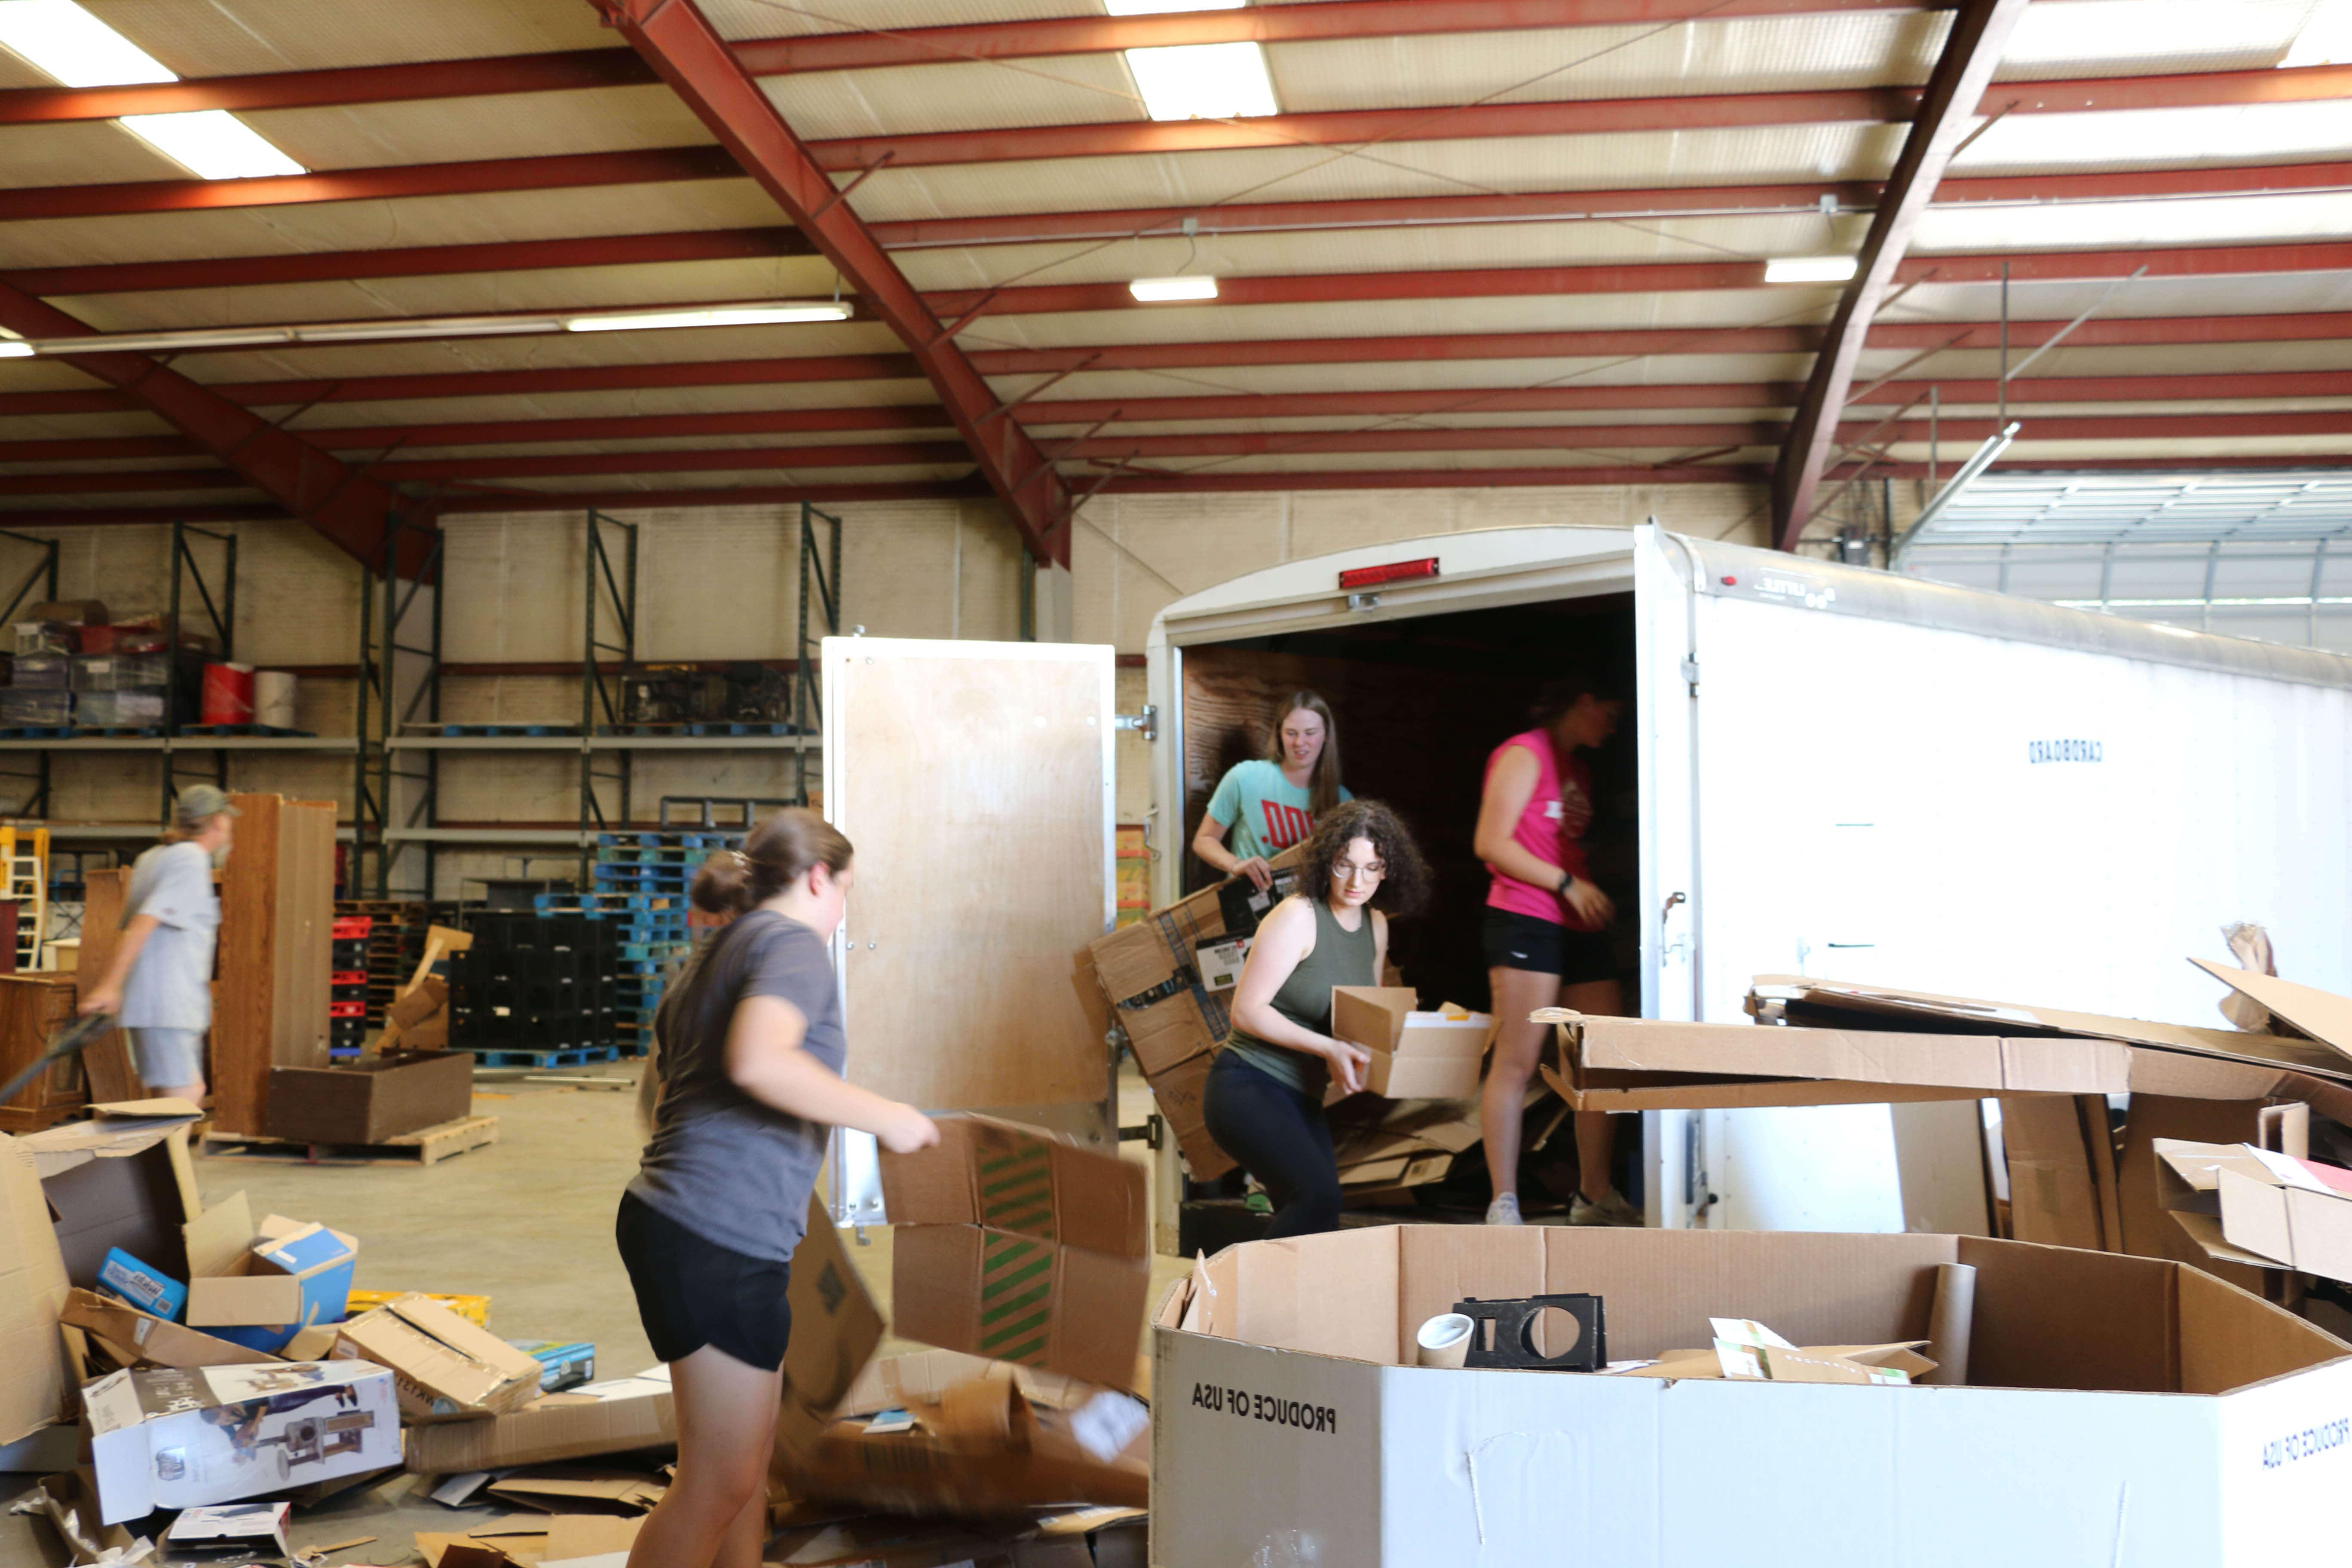 students serve in ministry warehouse unloading cardboard from trailer to recycle